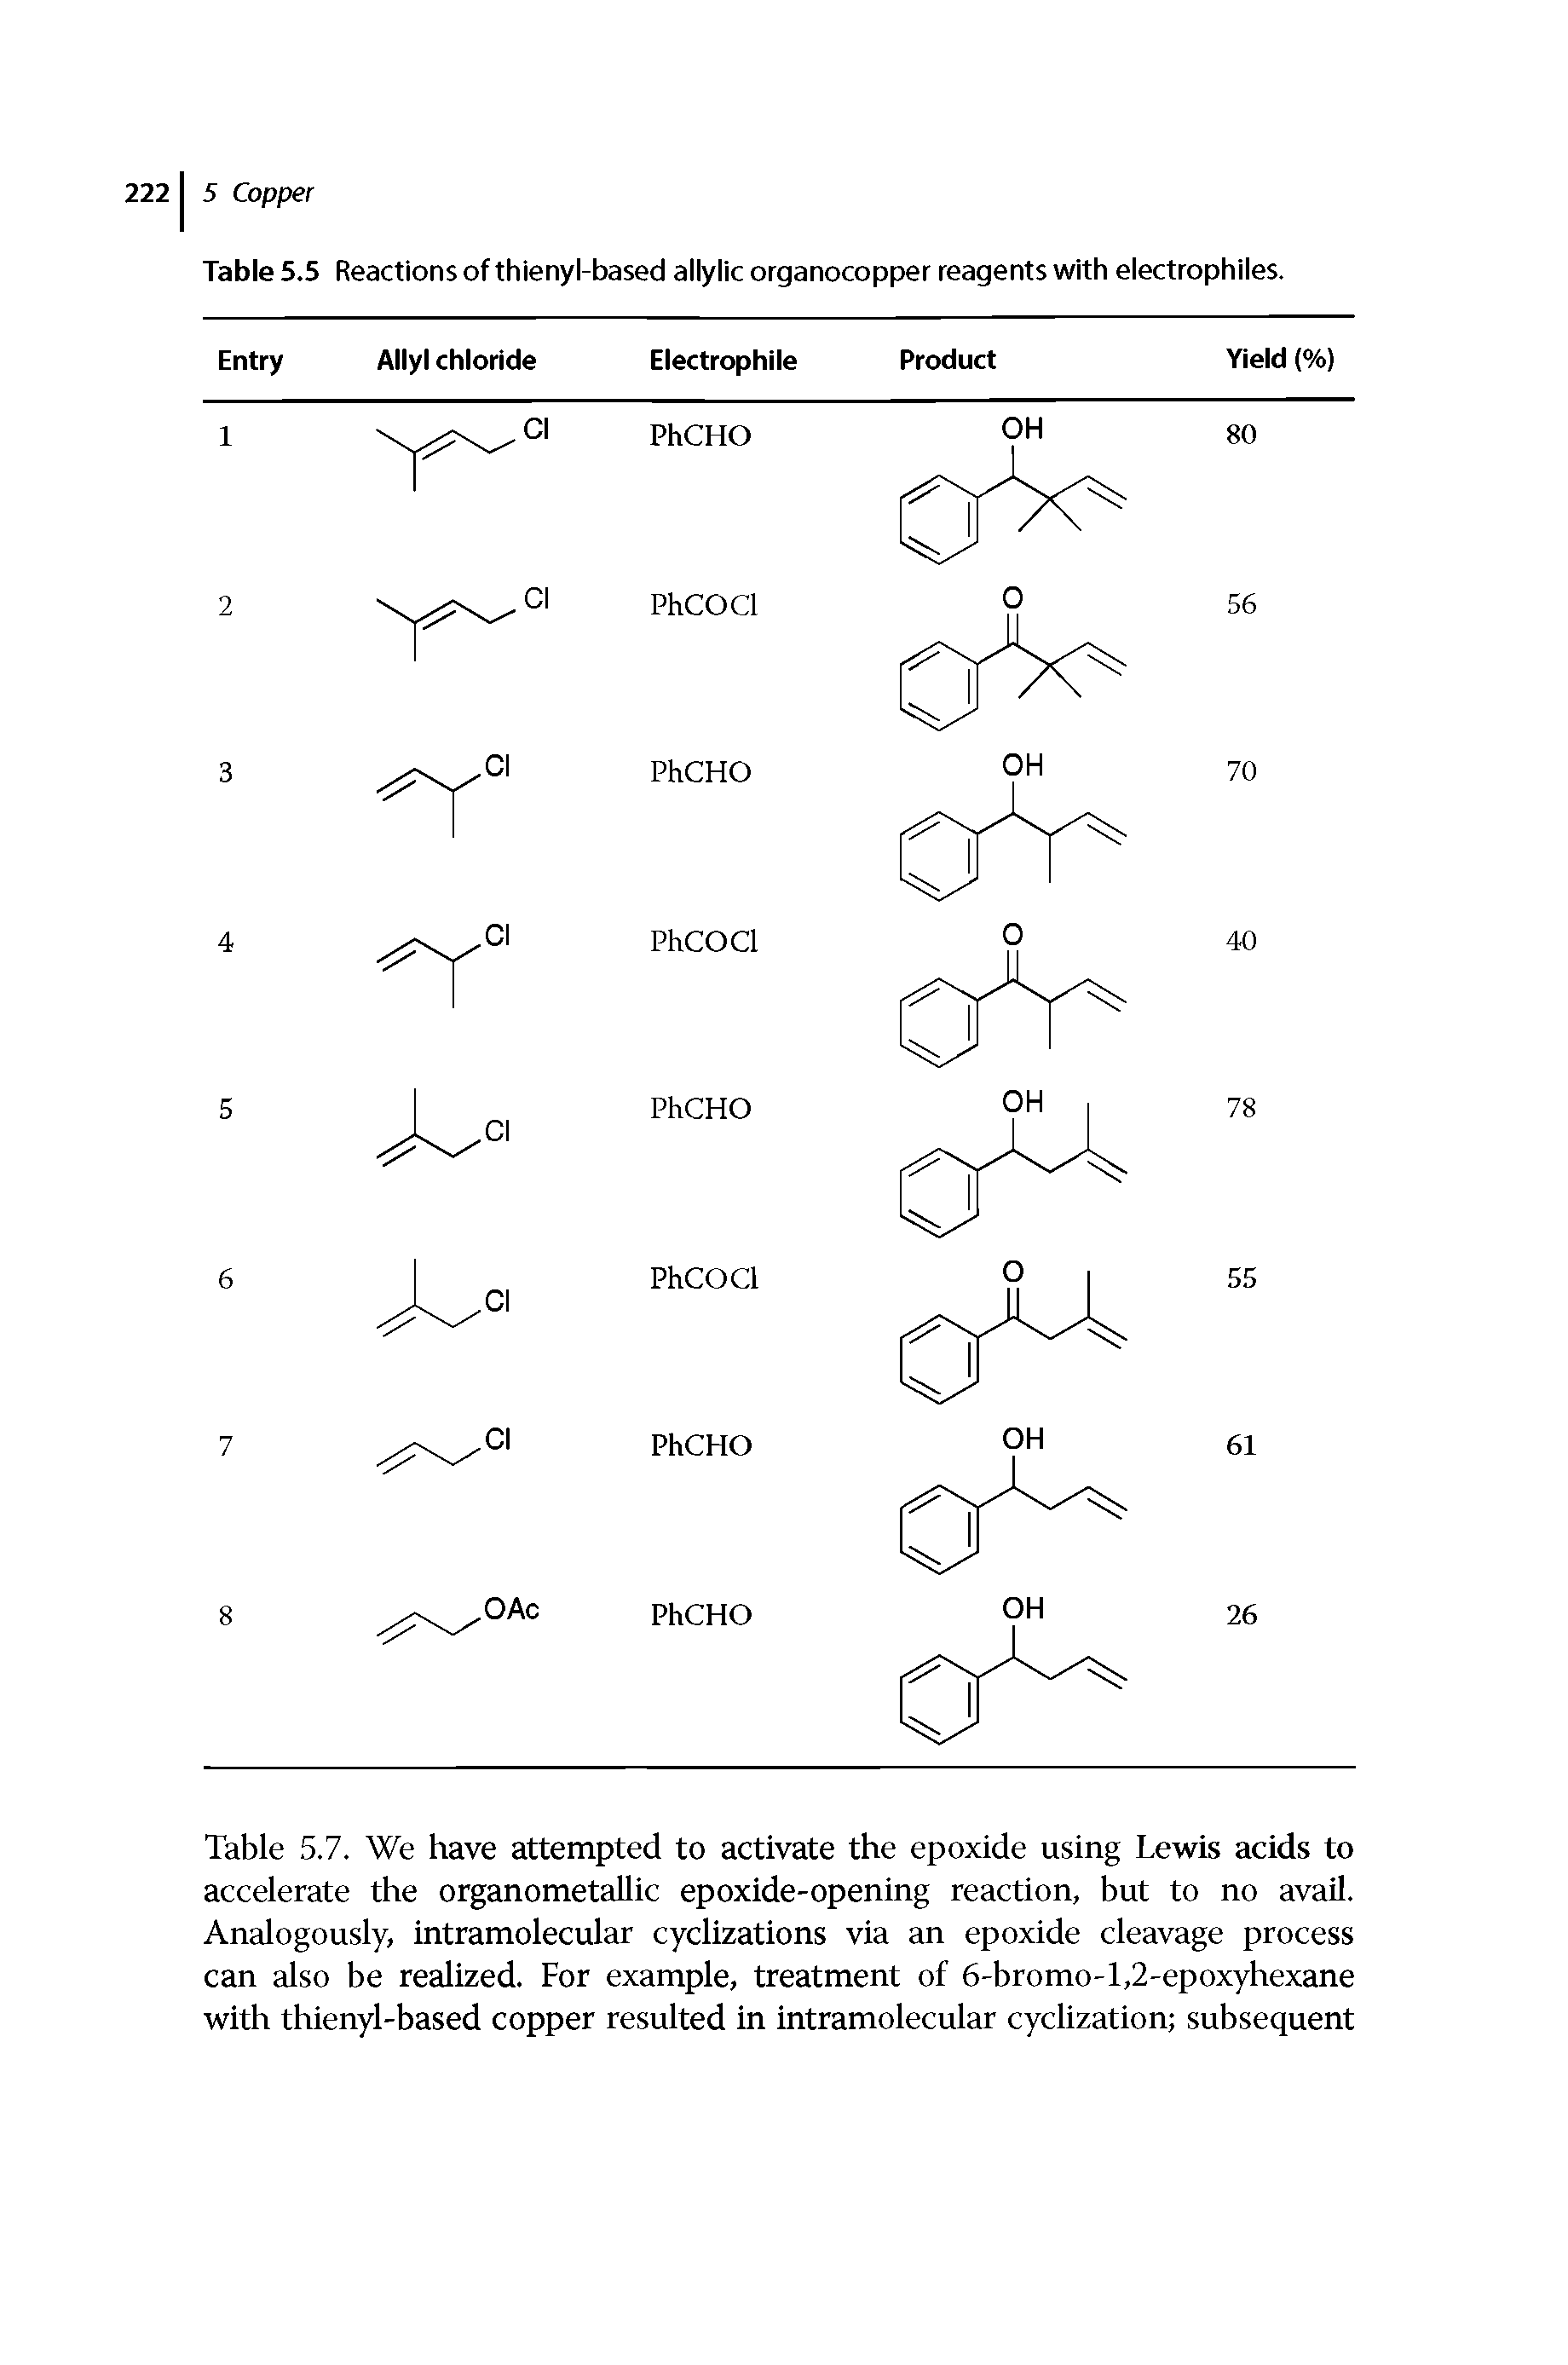 Table 5.7. We have attempted to activate the epoxide using Lewis acids to accelerate the organometallic epoxide-opening reaction, but to no avail. Analogously, intramolecular cyclizations via an epoxide cleavage process can also be realized. For example, treatment of 6-bromo-l,2-epoxyhexane with thienyl-based copper resulted in intramolecular cyclization subsequent...